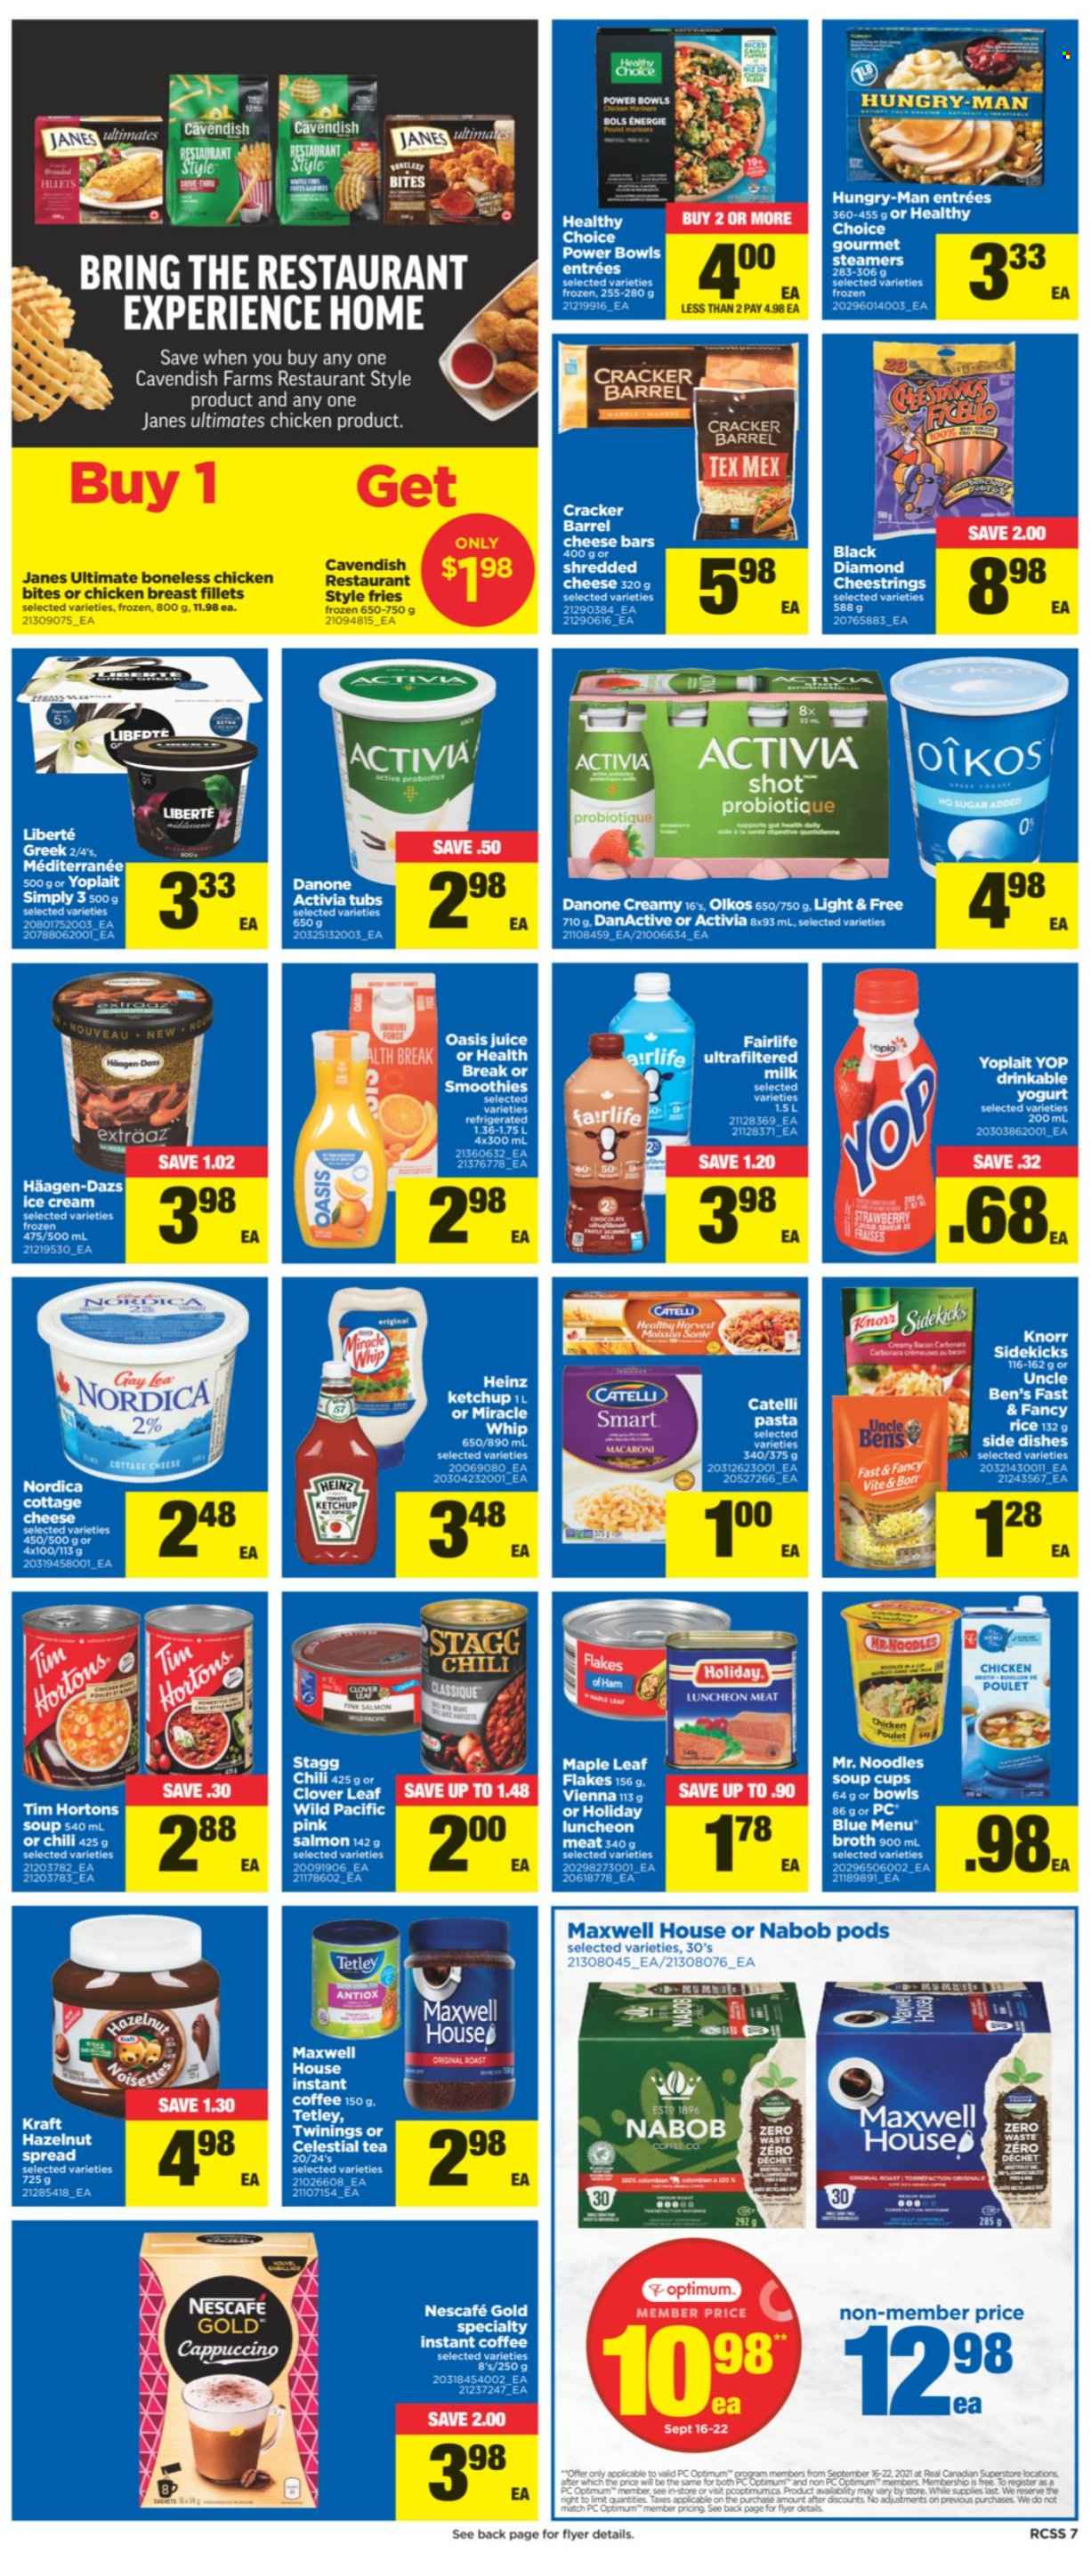 thumbnail - Real Canadian Superstore Flyer - September 16, 2021 - September 22, 2021 - Sales products - salmon, macaroni, soup, pasta, noodles, Healthy Choice, Kraft®, ham, lunch meat, cottage cheese, shredded cheese, string cheese, yoghurt, Clover, Activia, Oikos, Yoplait, milk, Miracle Whip, ice cream, Häagen-Dazs, chicken bites, potato fries, crackers, broth, Heinz, Uncle Ben's, rice, juice, Maxwell House, tea, Twinings, instant coffee, chicken breasts, chicken, cup, Optimum, Knorr, Danone, ketchup, Nescafé. Page 7.